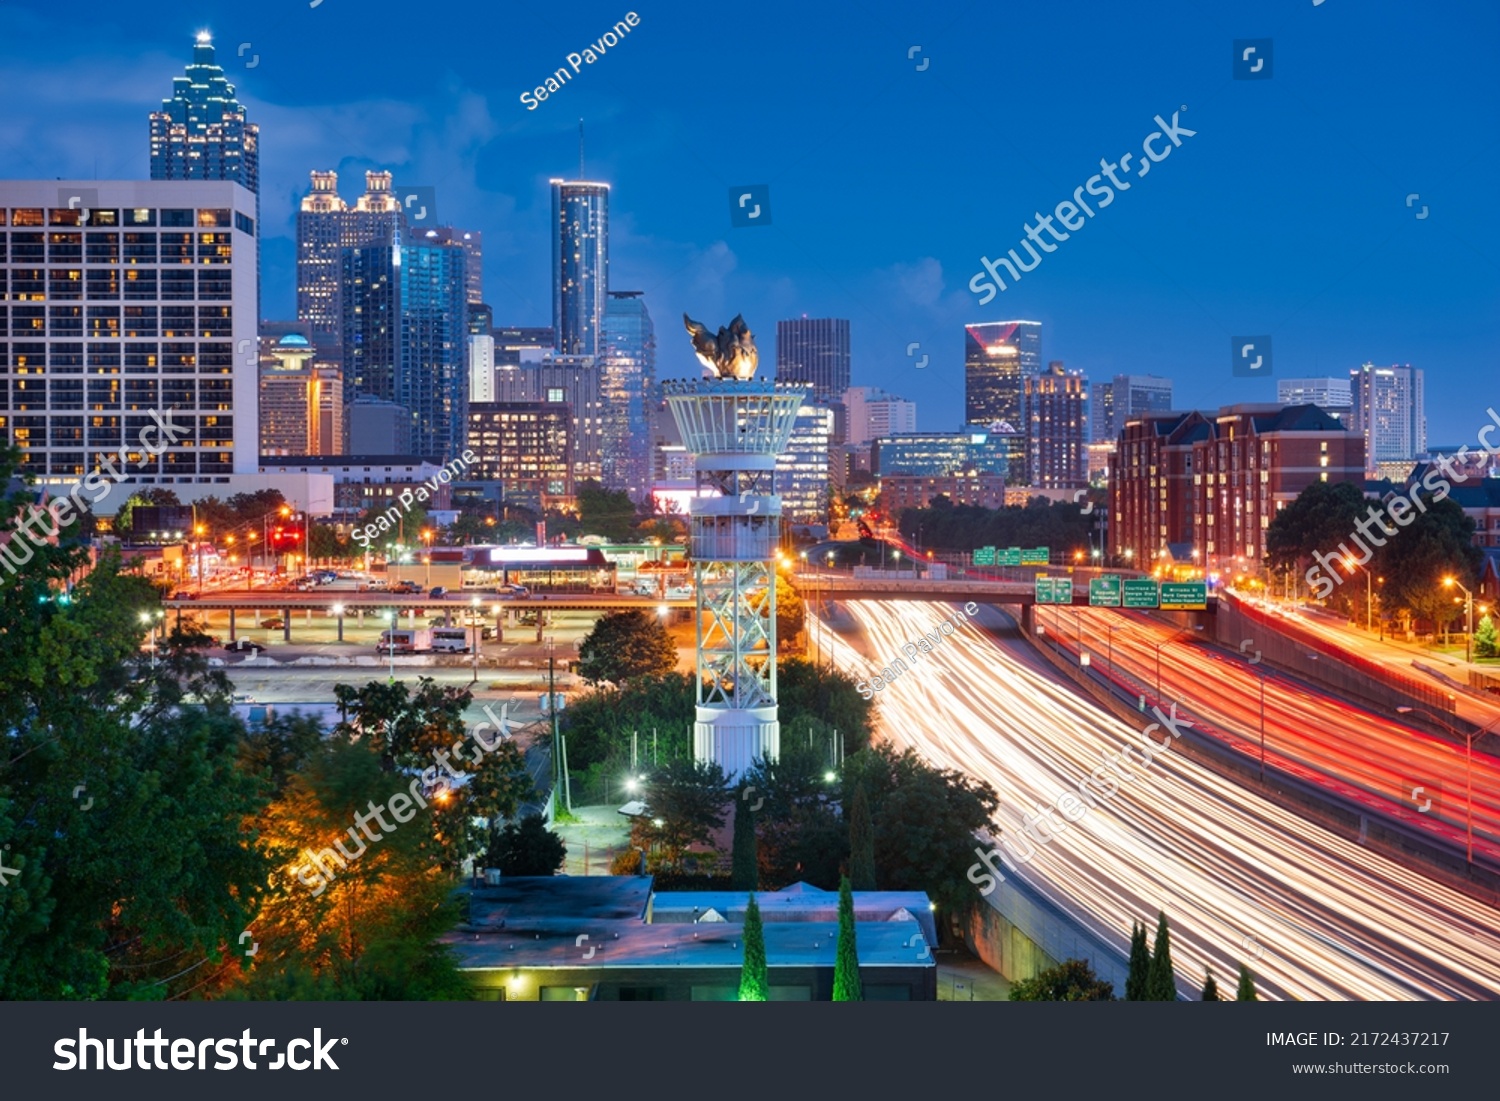 Atlanta, Georgia, USA downtown city skyline on the highway in the evening. #2172437217